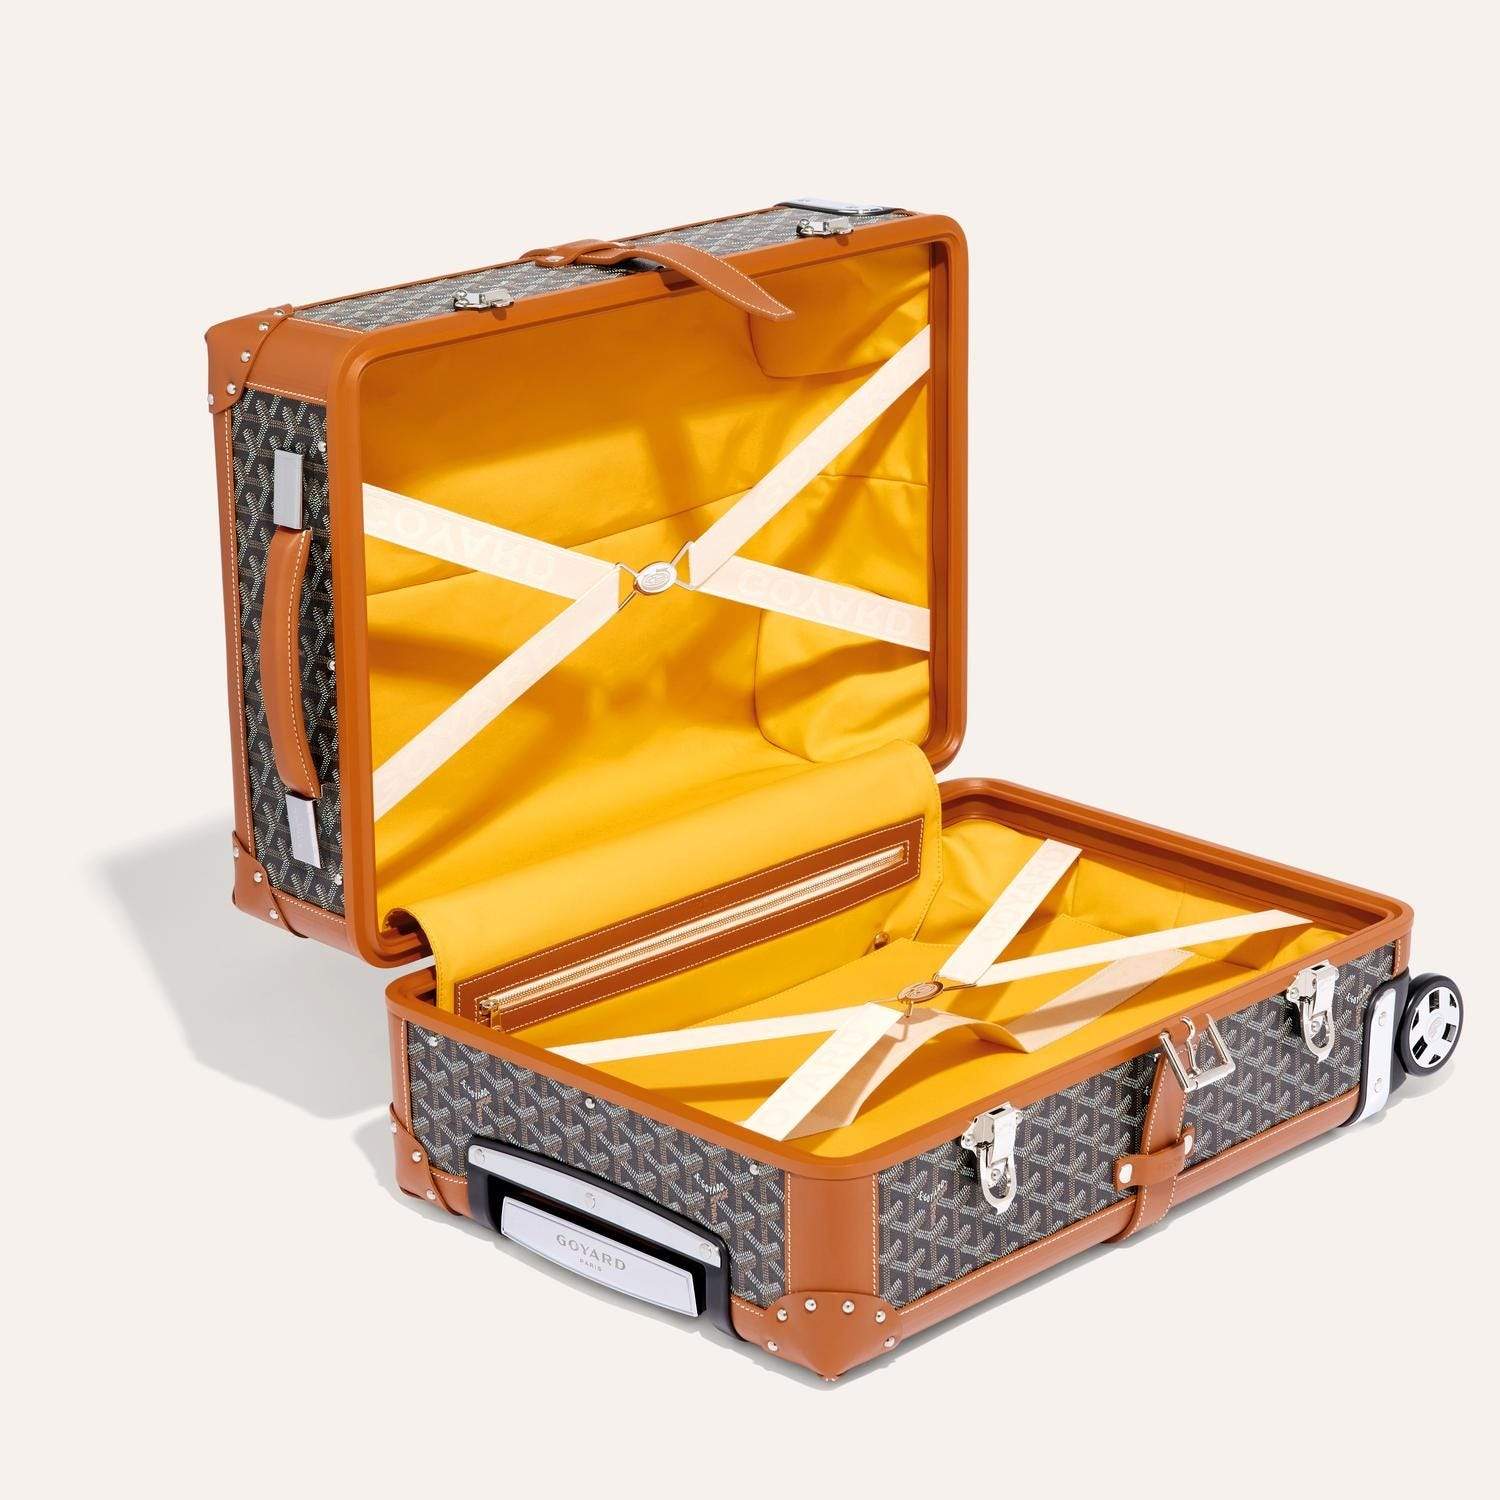 What is the price of the Goyard luggage trolley that Dallas Cowboy